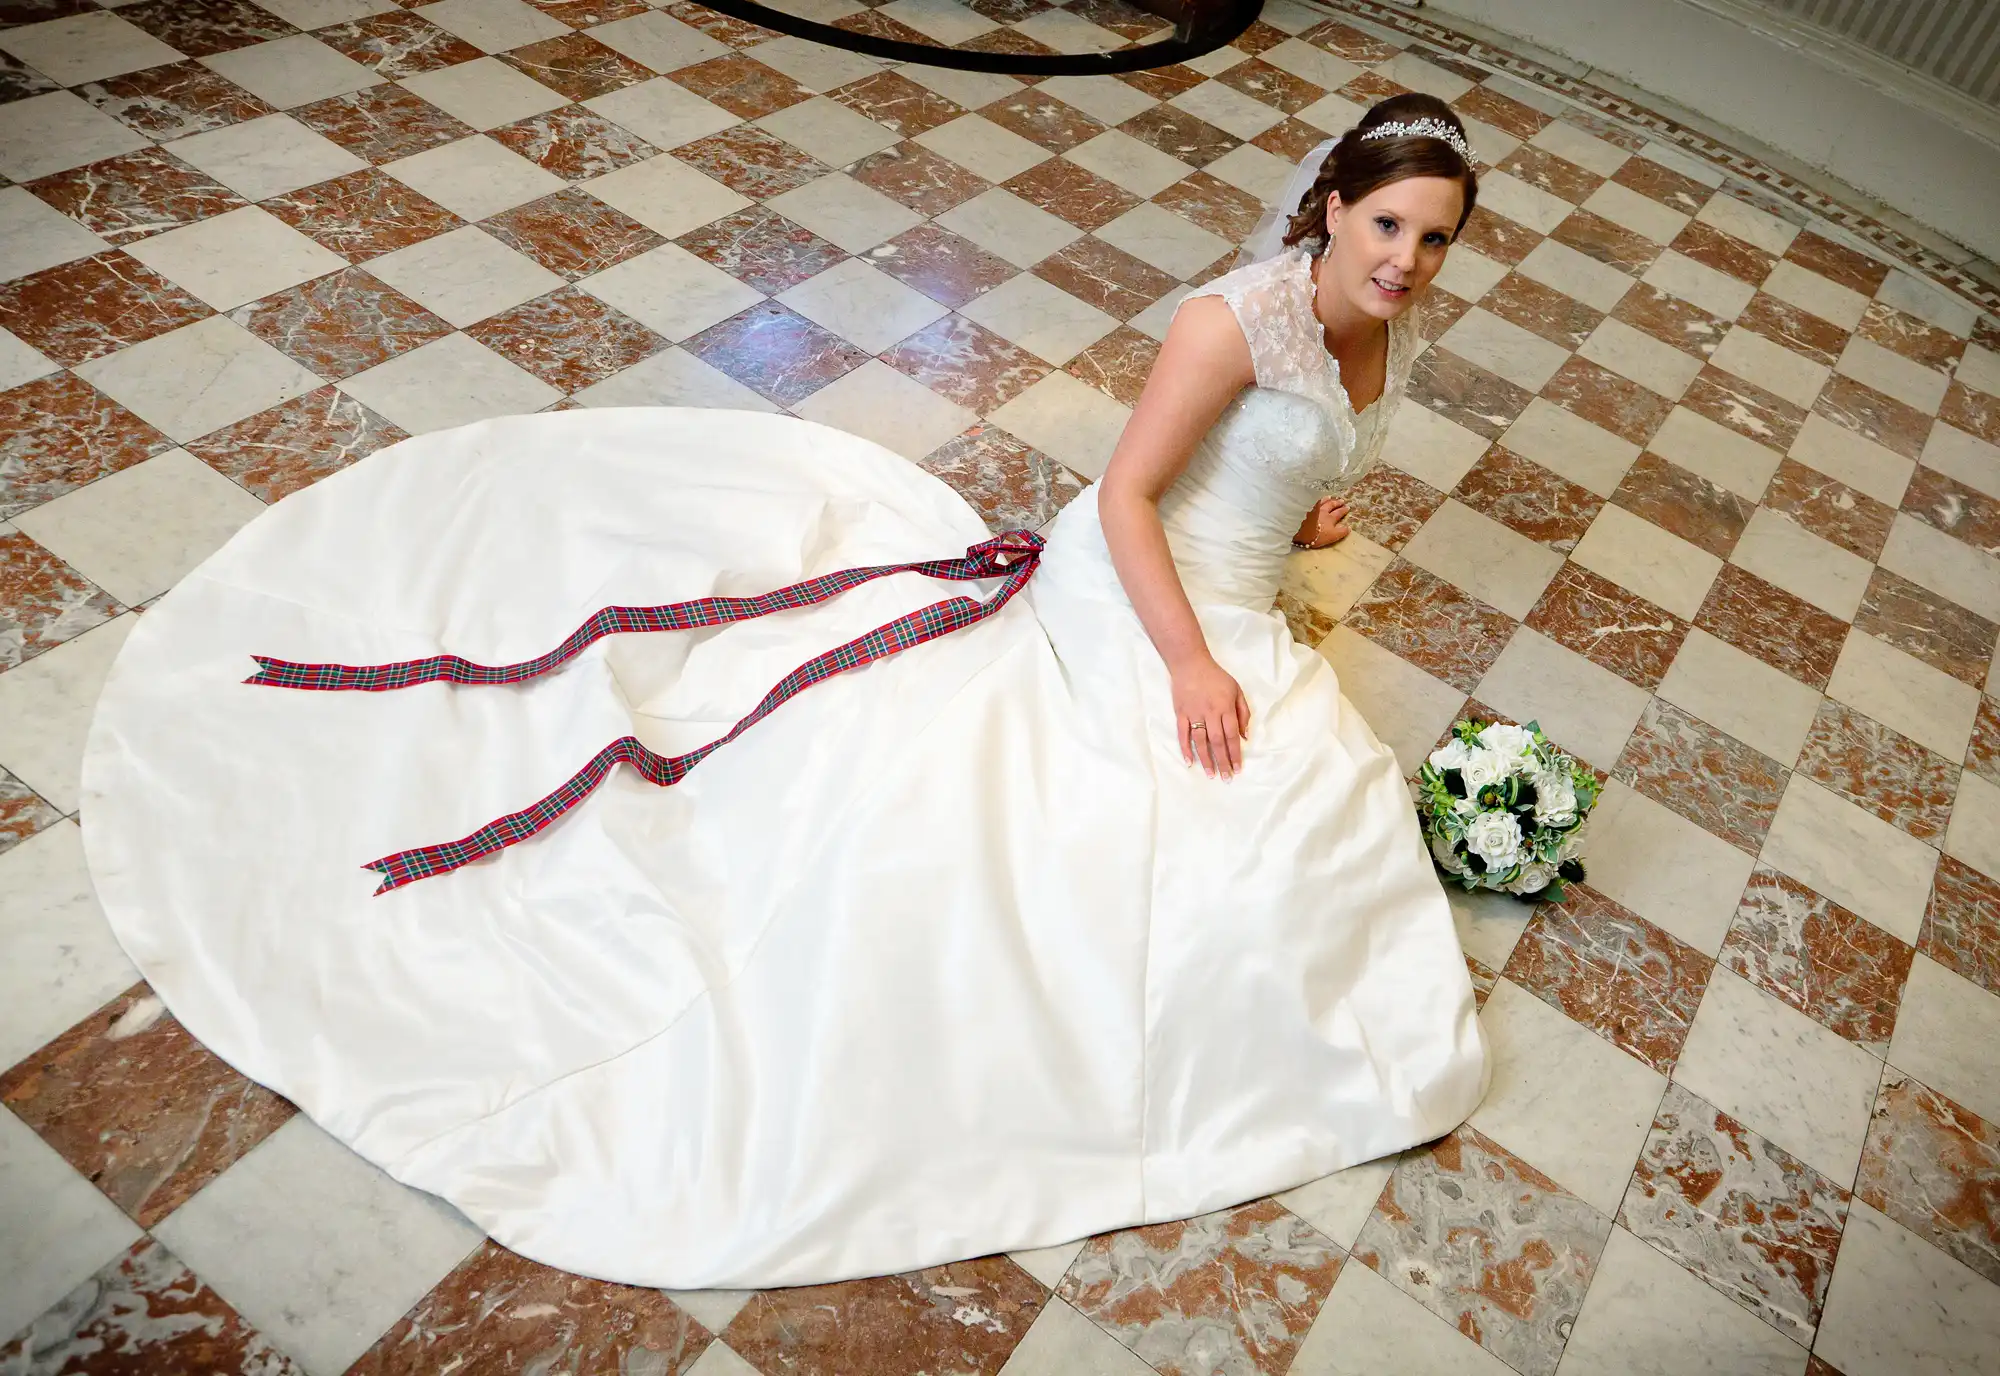 Bride sitting on a tiled floor in a large ballroom, wearing a white gown with an expansive train and holding a bouquet of white flowers.